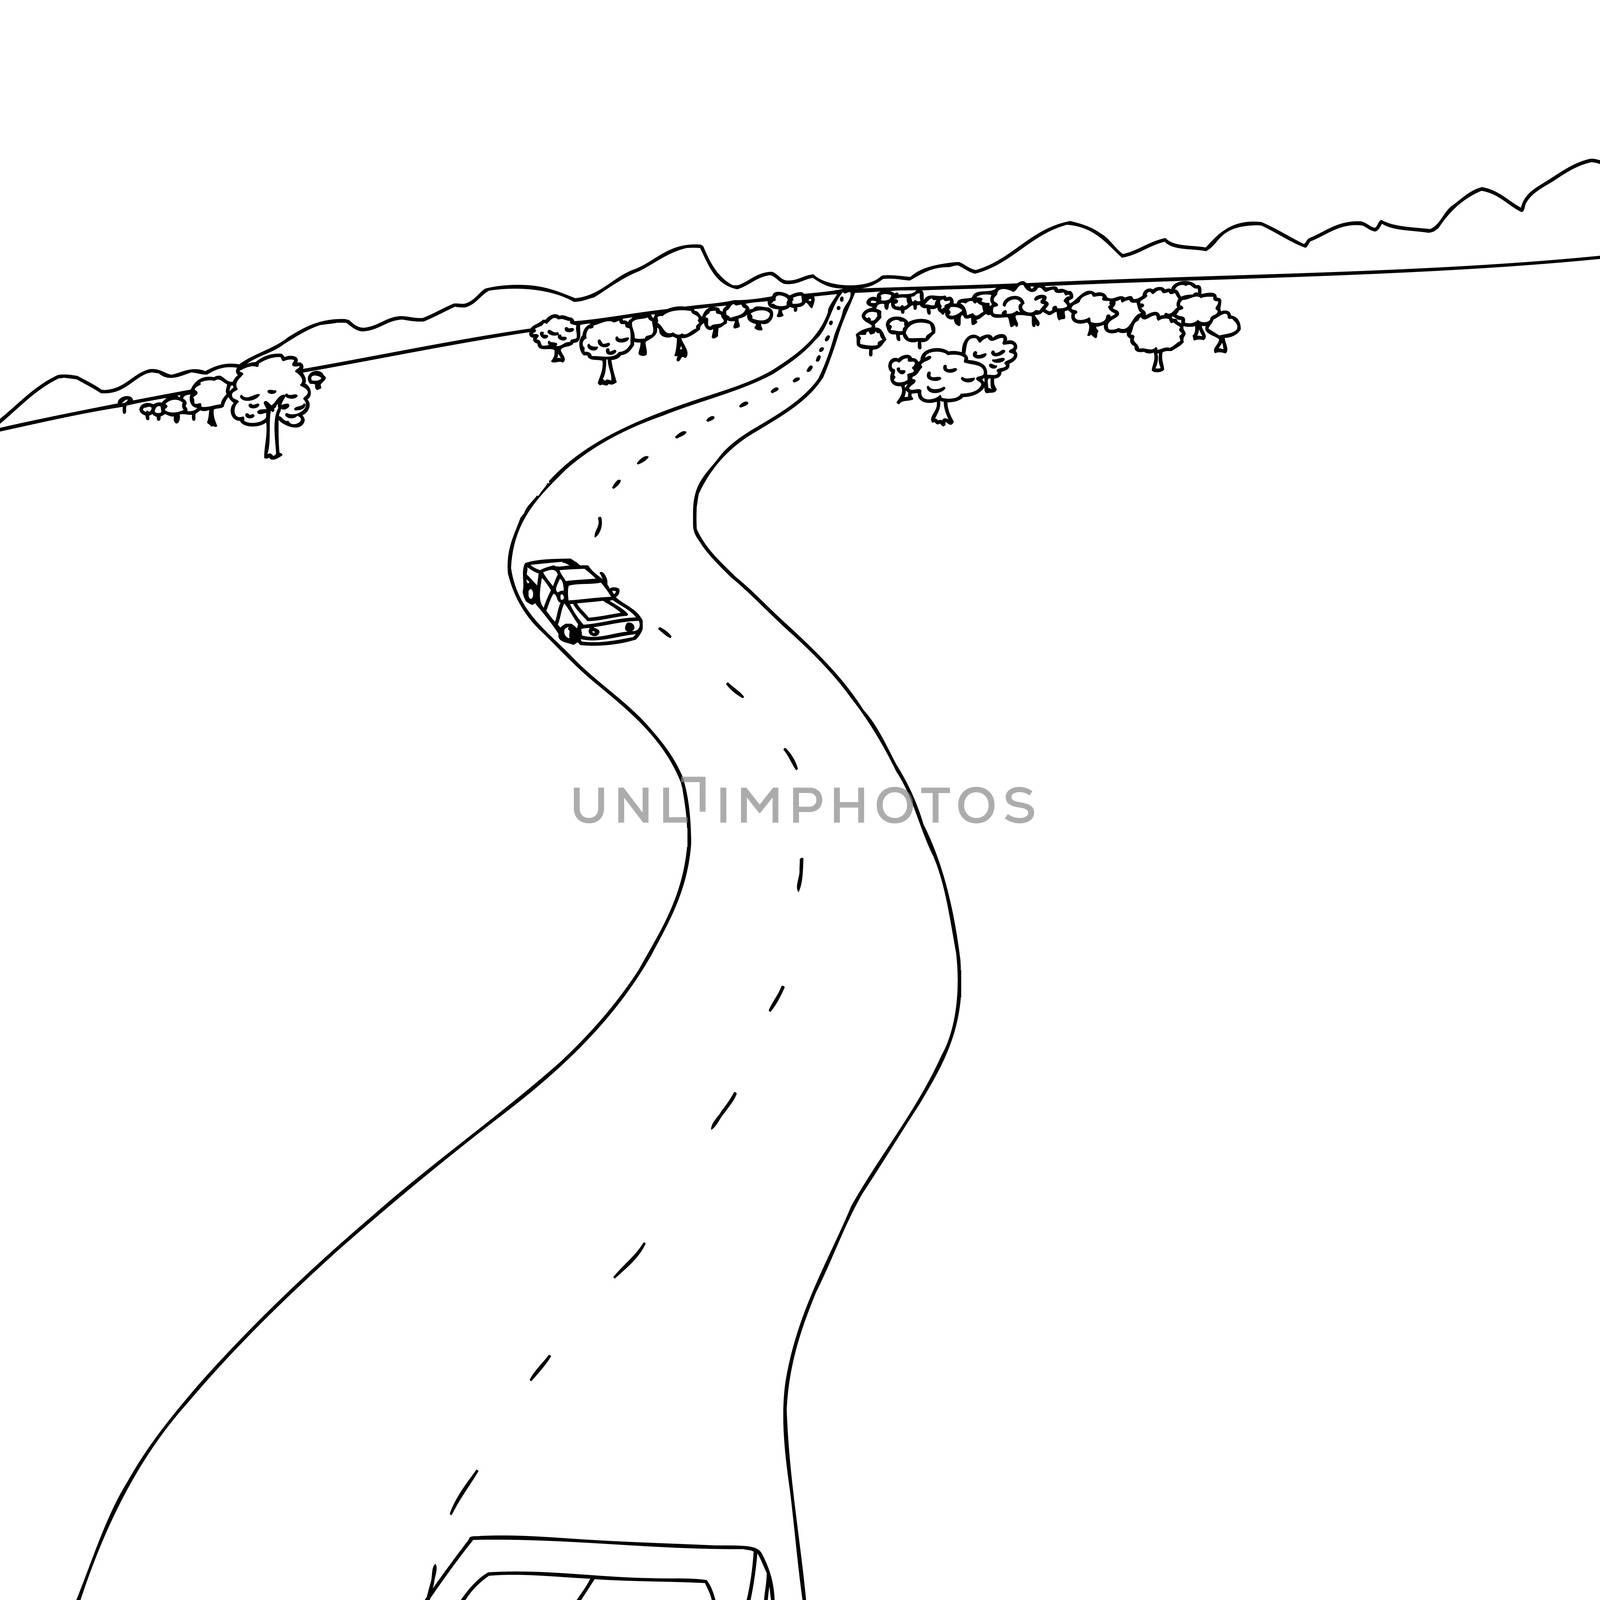 Hand drawn cartoon of cars on road to mountains